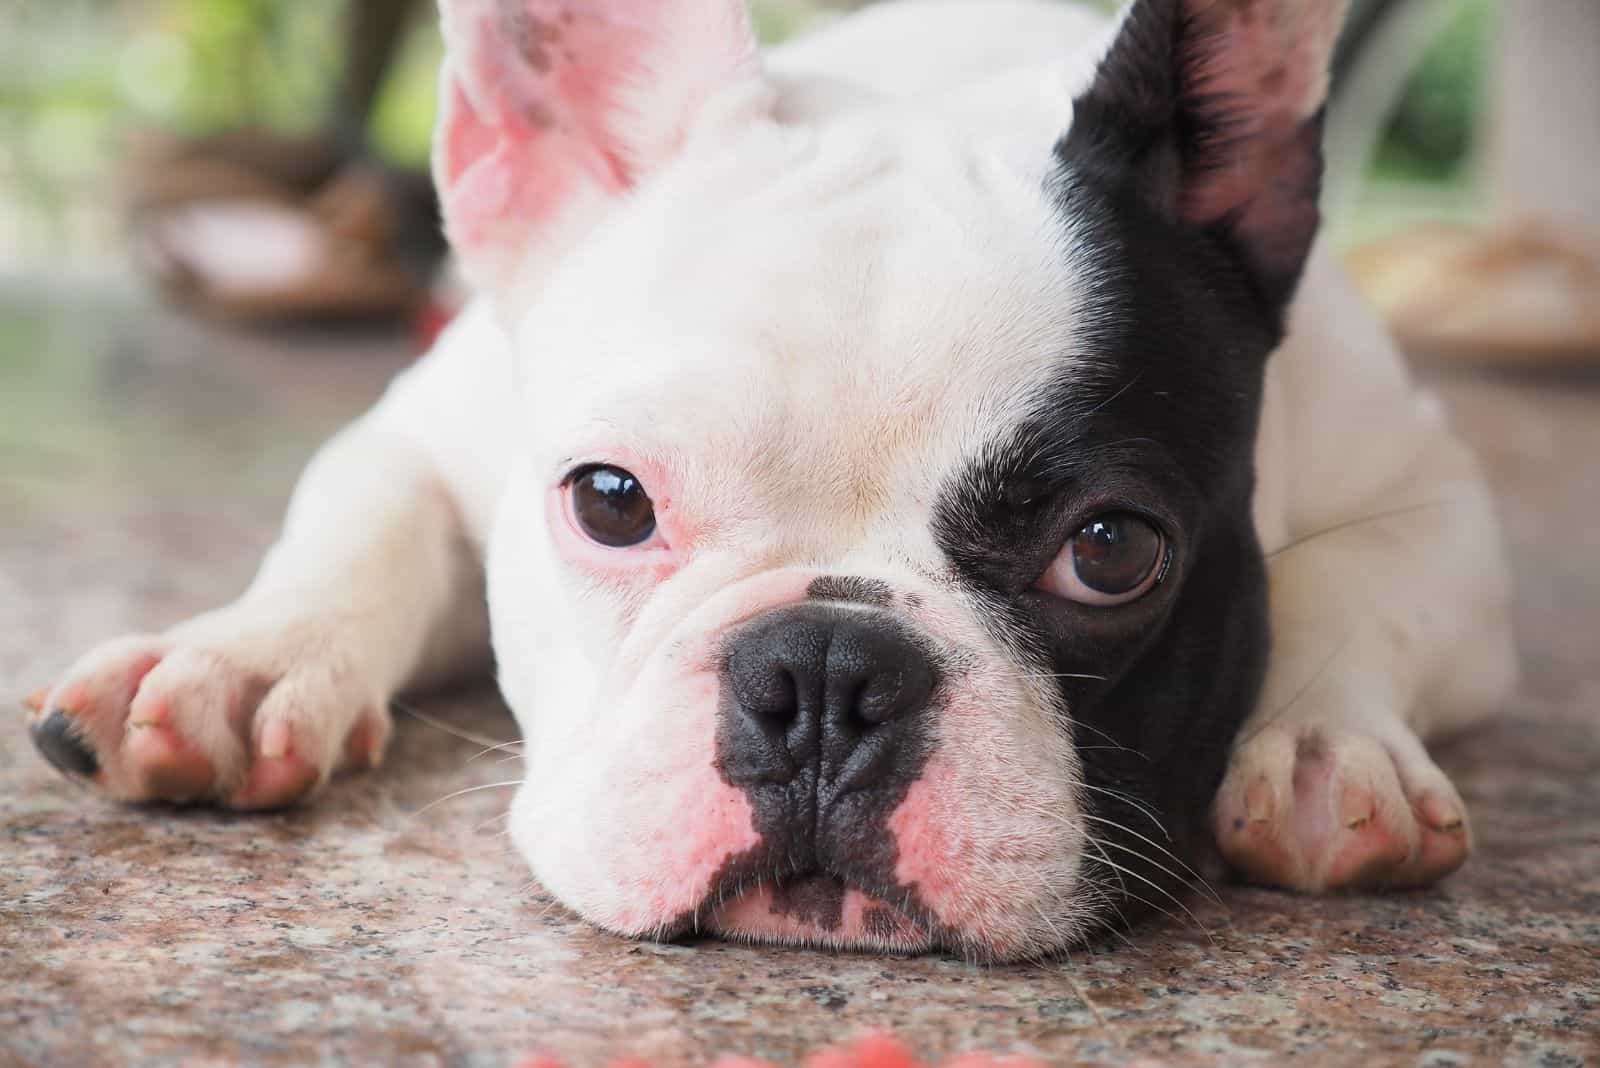 A Pied French Bulldog lies sadly on the floor